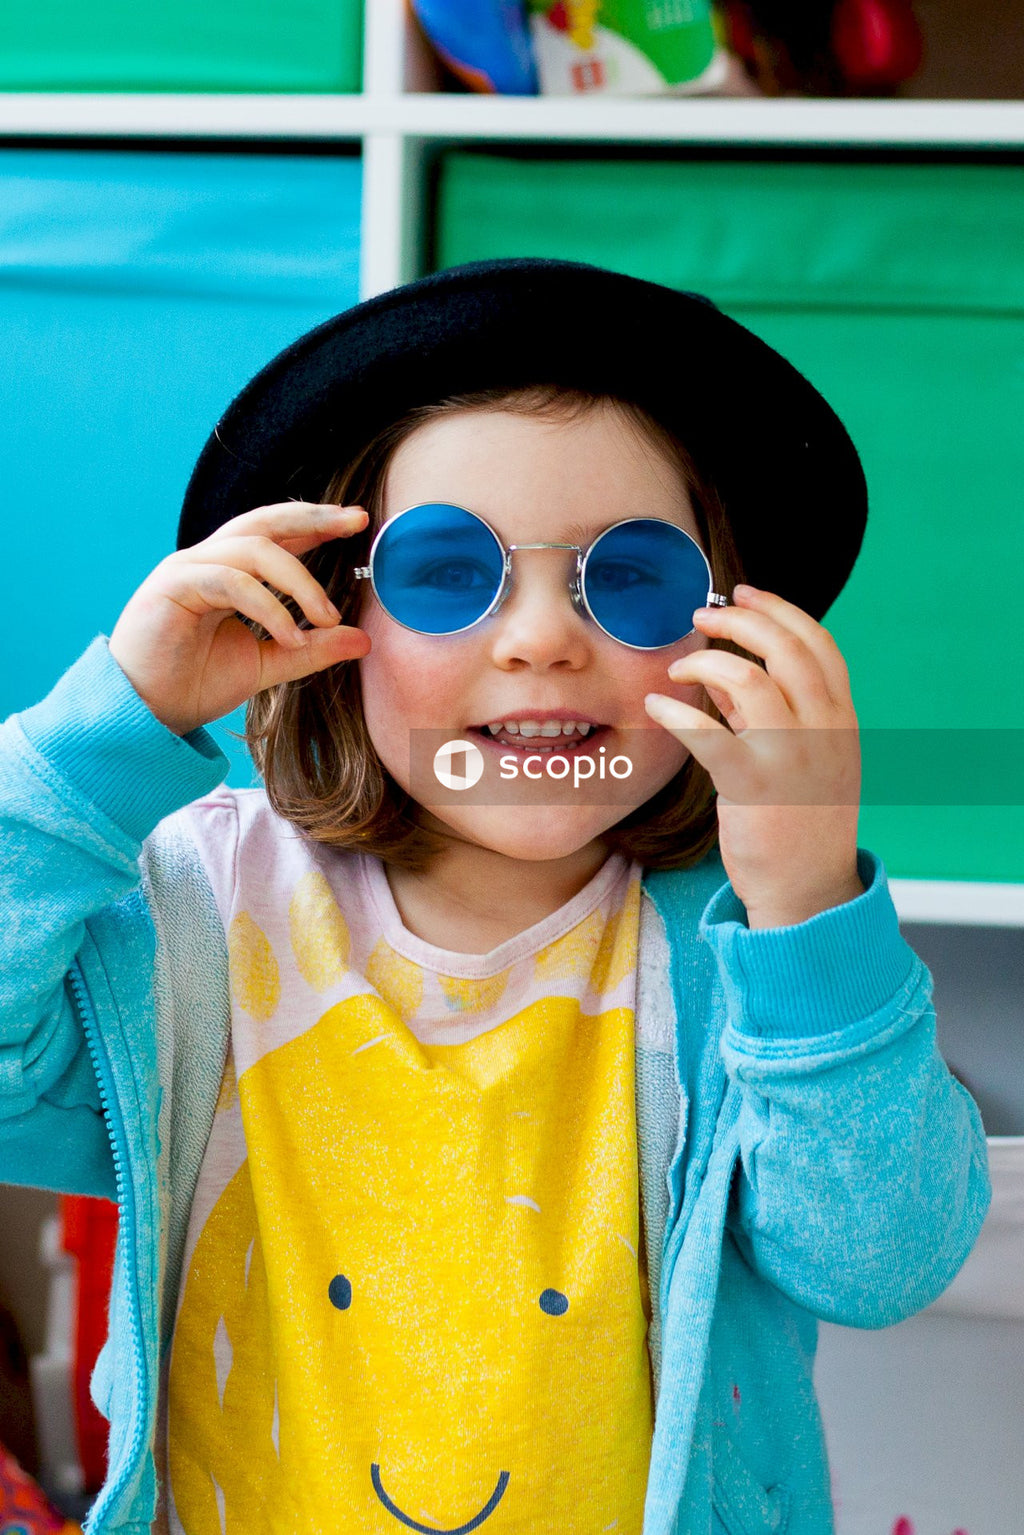 Young girl wearing blue sunglasses and hat